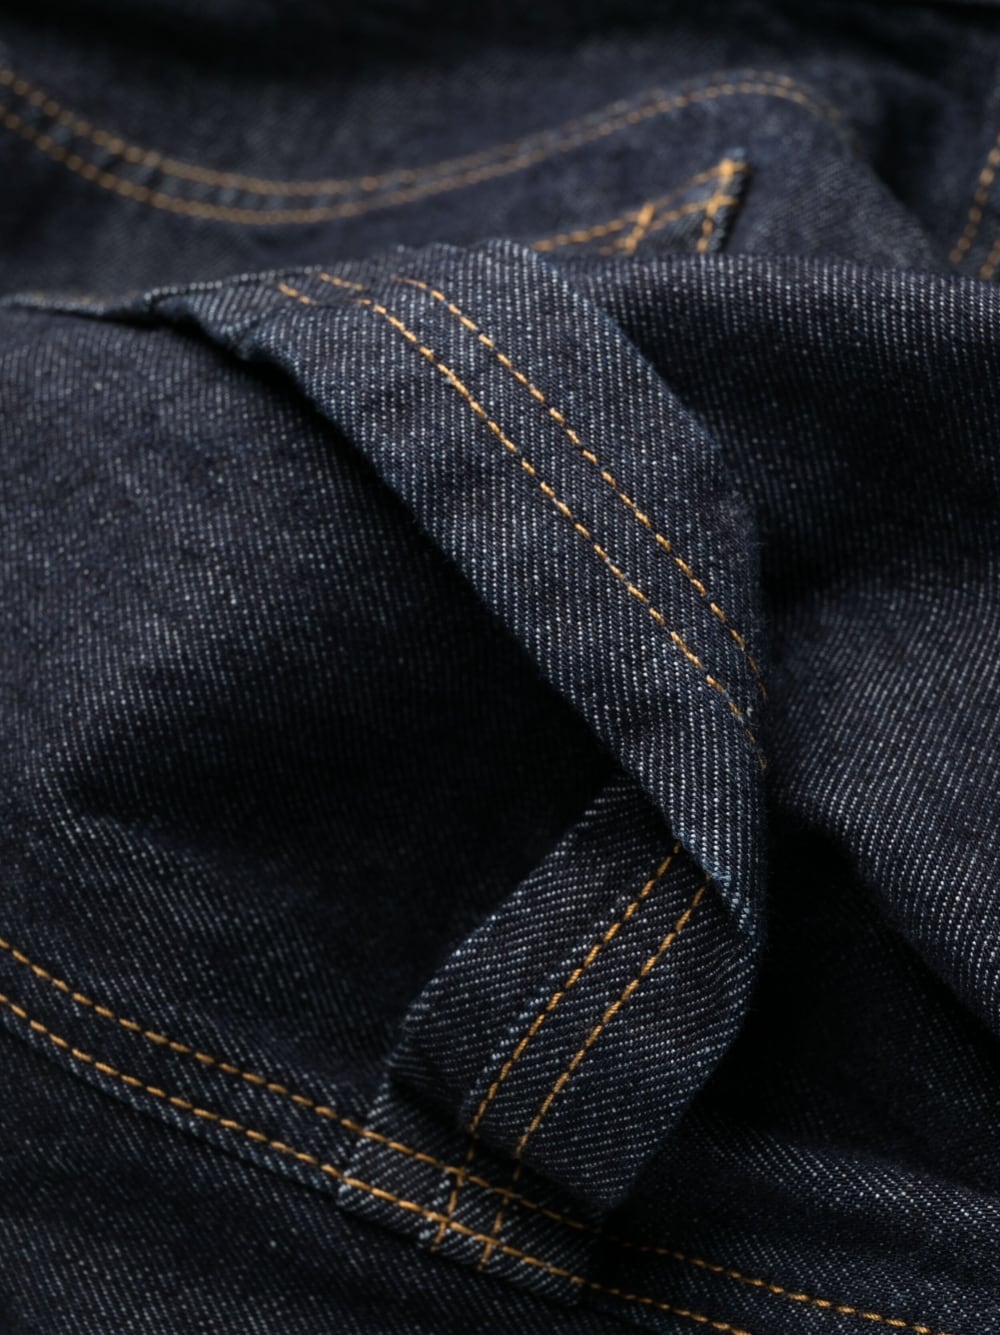 contrast-stitching straight jeans